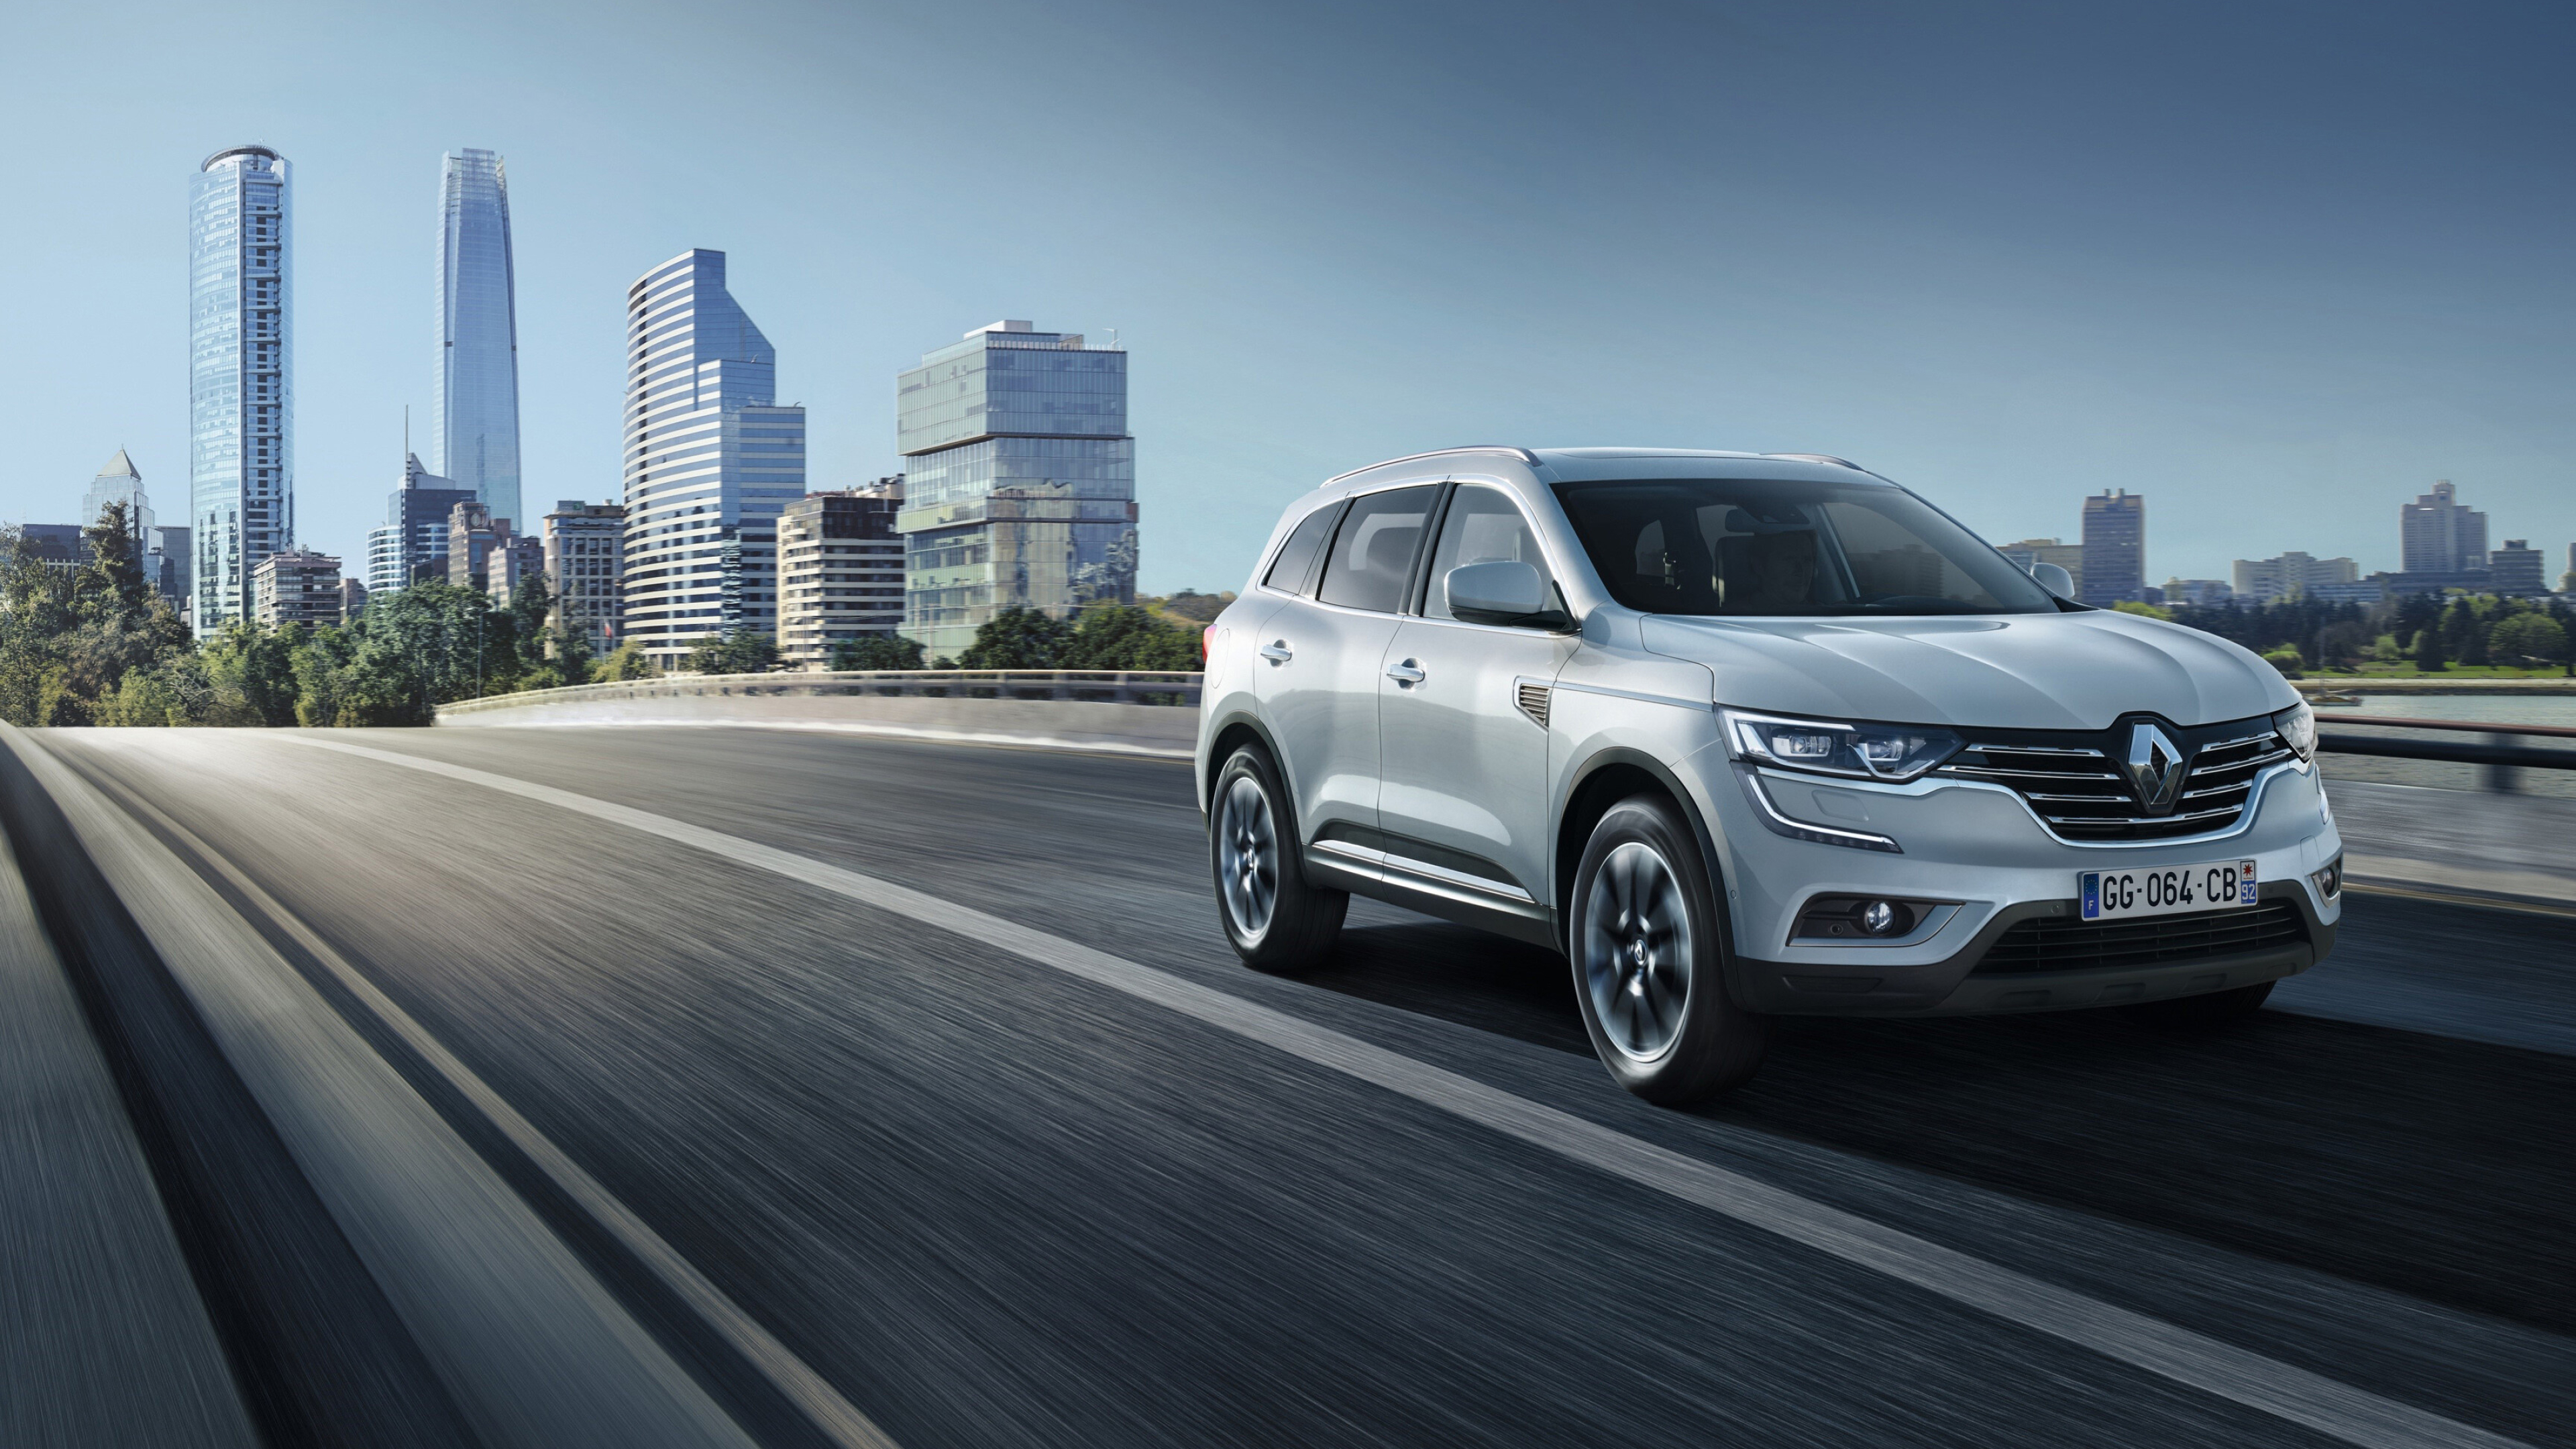 Renault: Koleos, A compact crossover SUV manufactured by the French manufacturer. 3840x2160 4K Wallpaper.